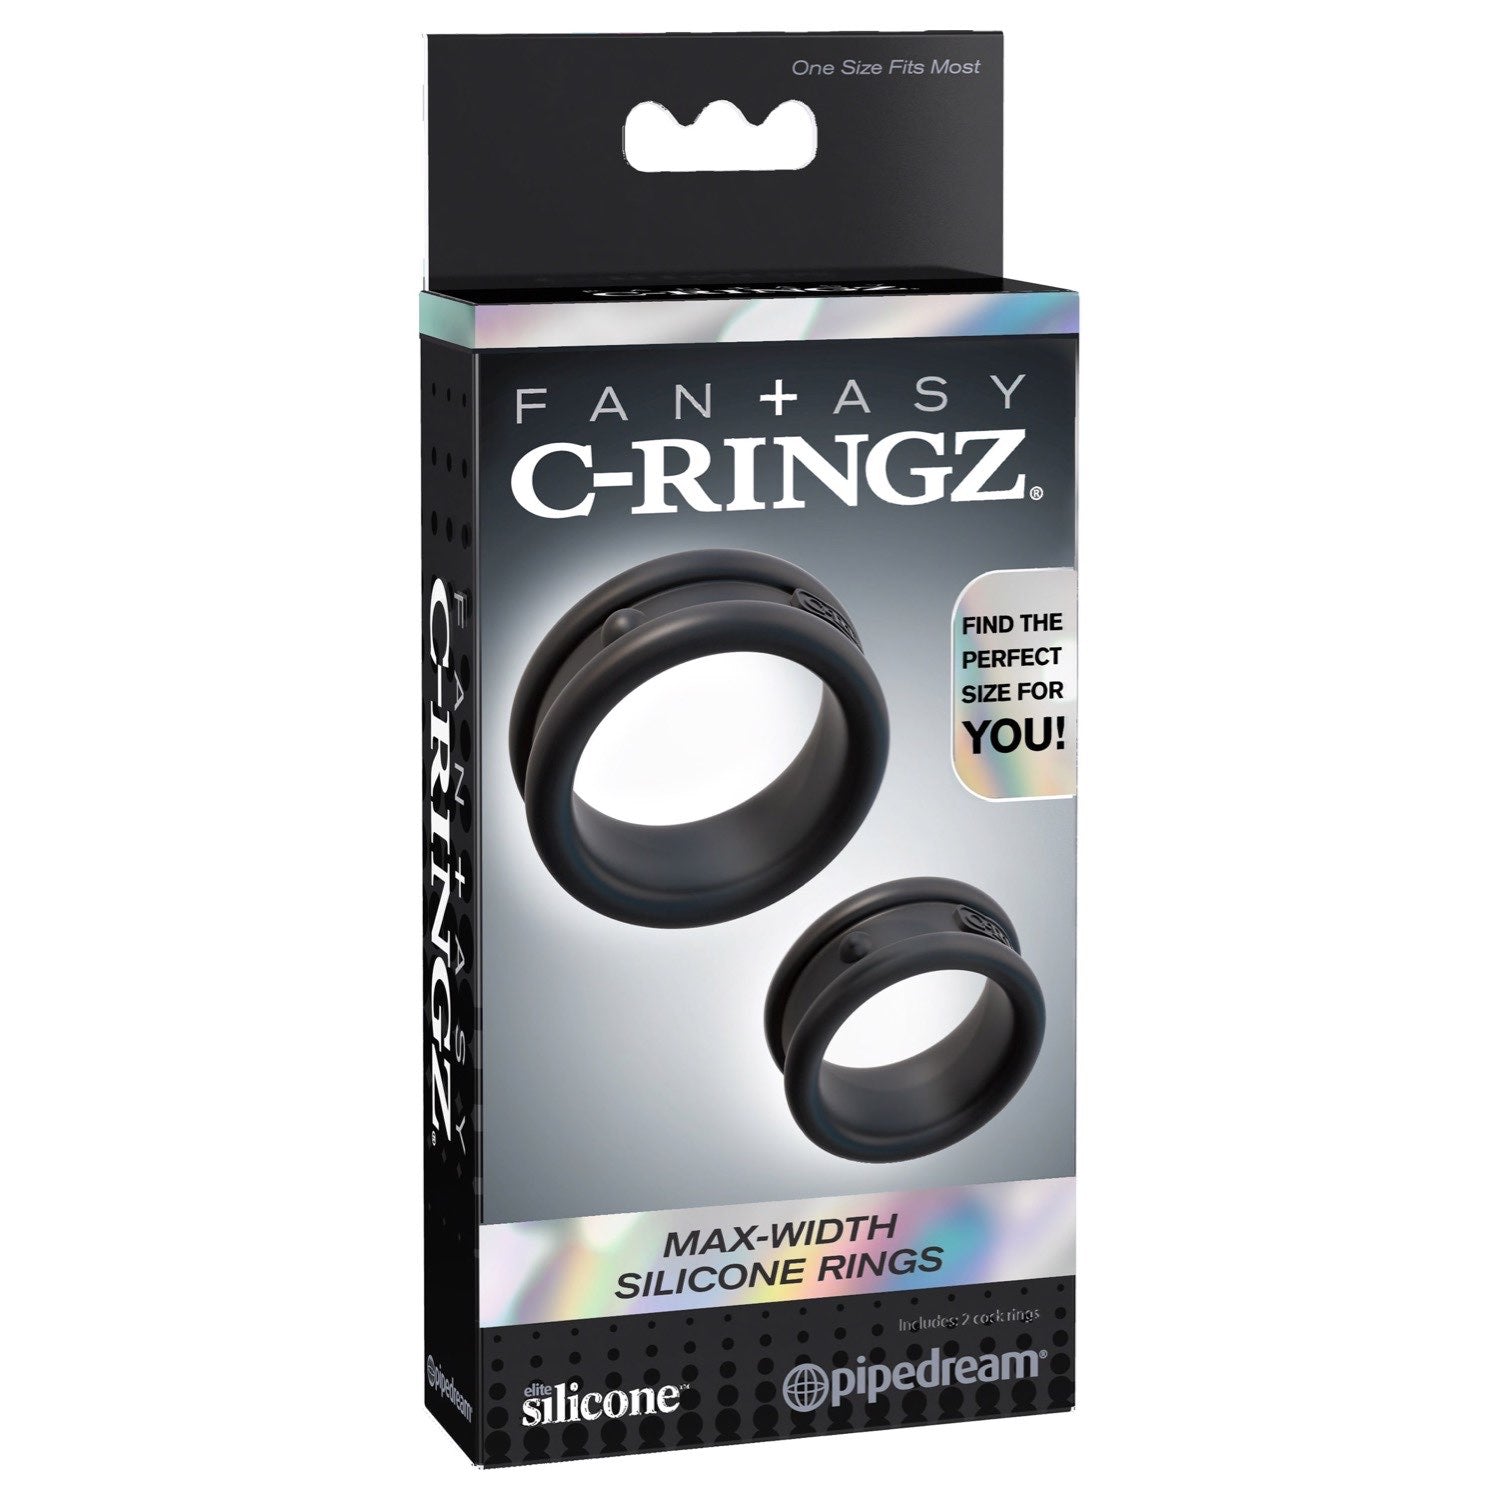 Fantasy C-Ringz Max Width Silicone Rings - Black Cock Rings - Set of 2 by Pipedream